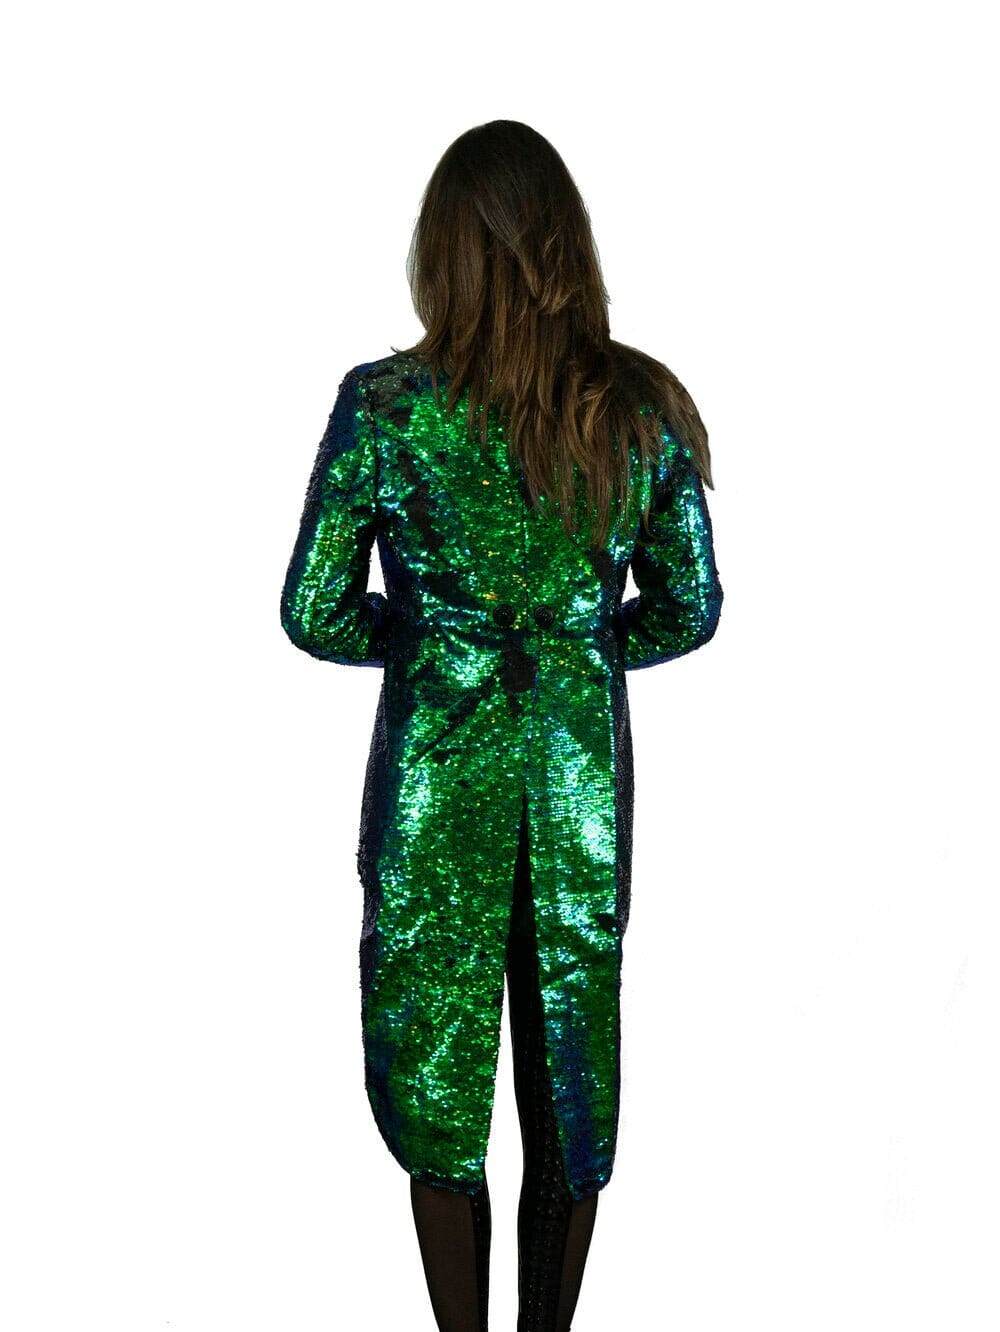 Green Sequin Jacket for Burning Man Style by Love Khaos Festival Clothing